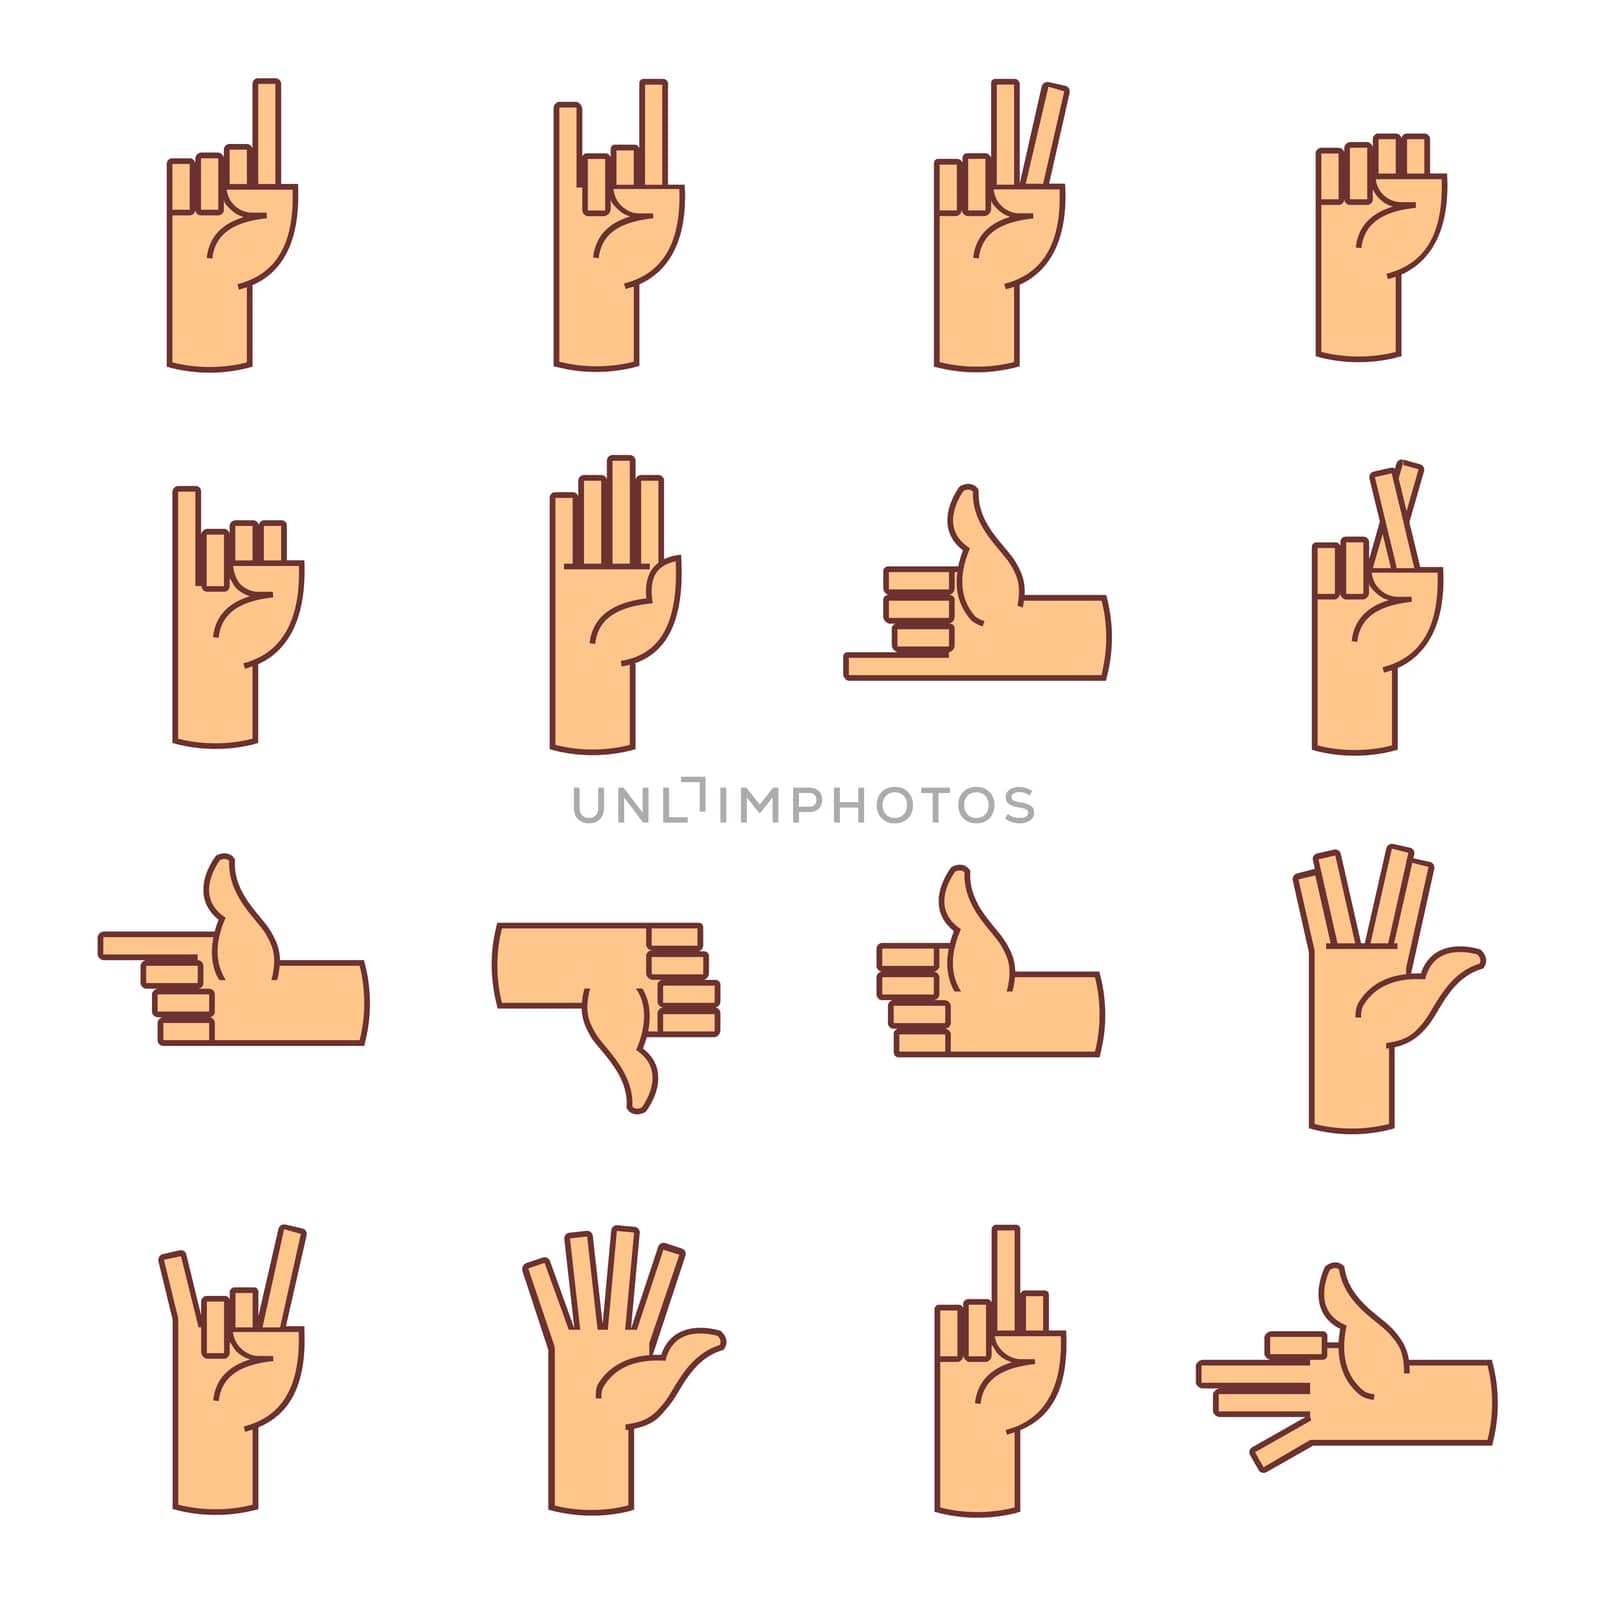  icons with a variety of hand gestures. Hand gestures and language icon set.